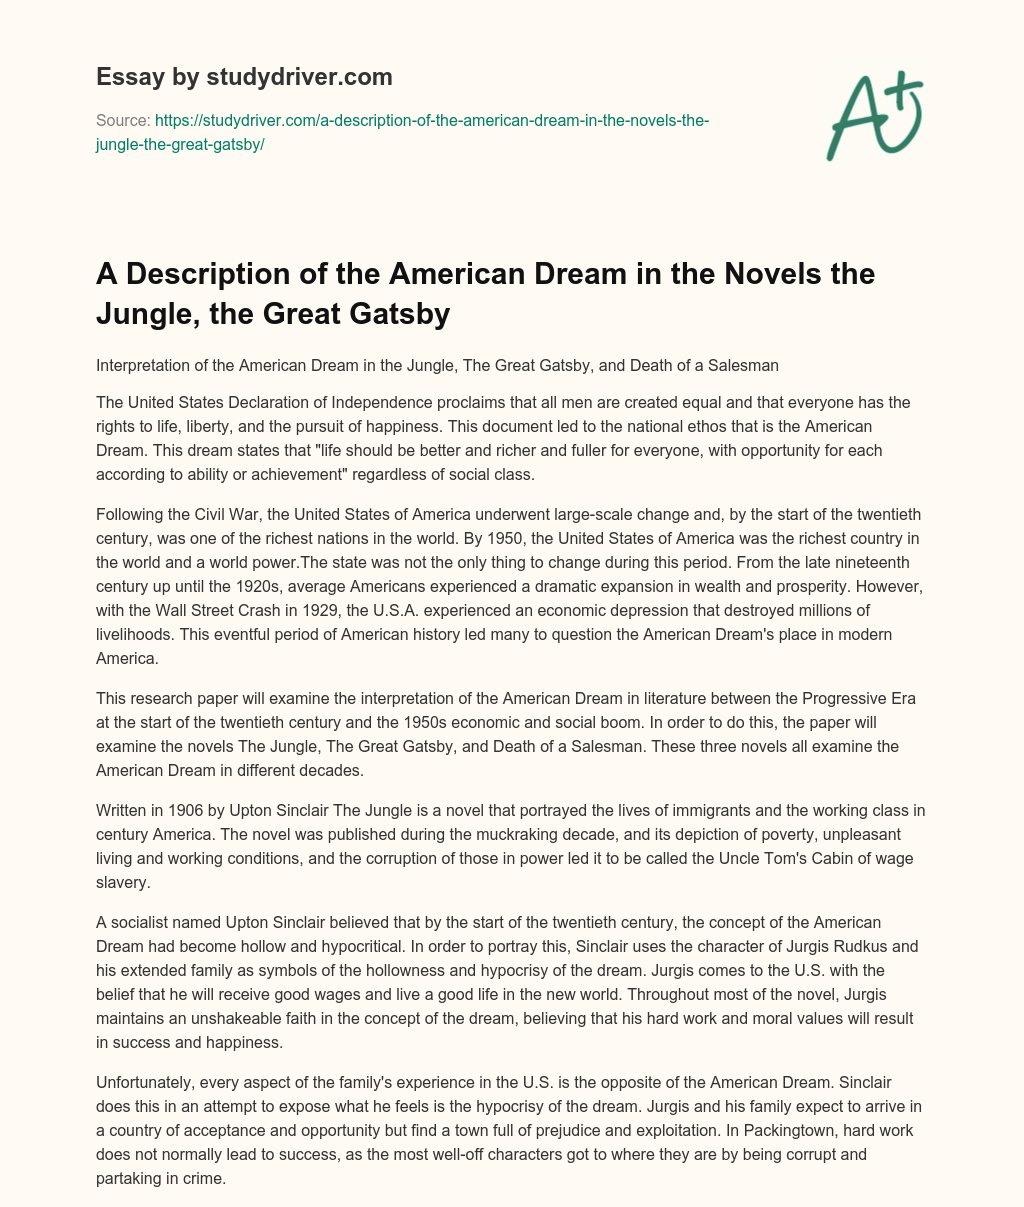 A Description of the American Dream in the Novels the Jungle, the Great Gatsby essay